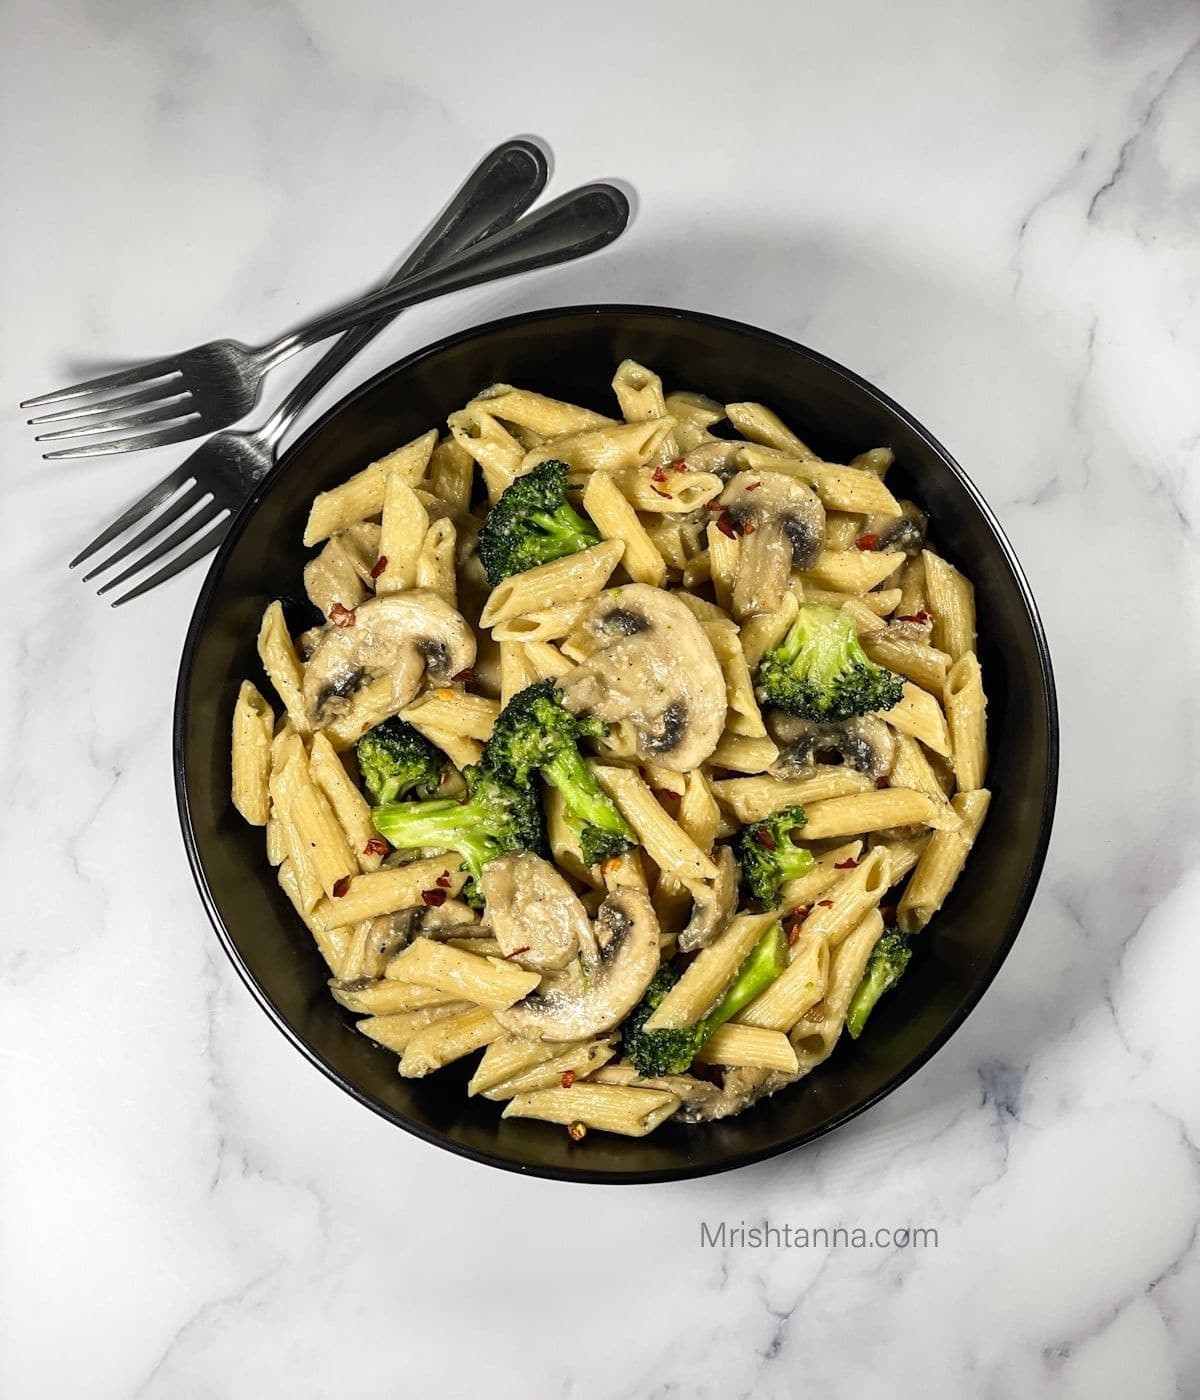 White table with black bowl of penne with broccoli florets and sliced mushrooms.